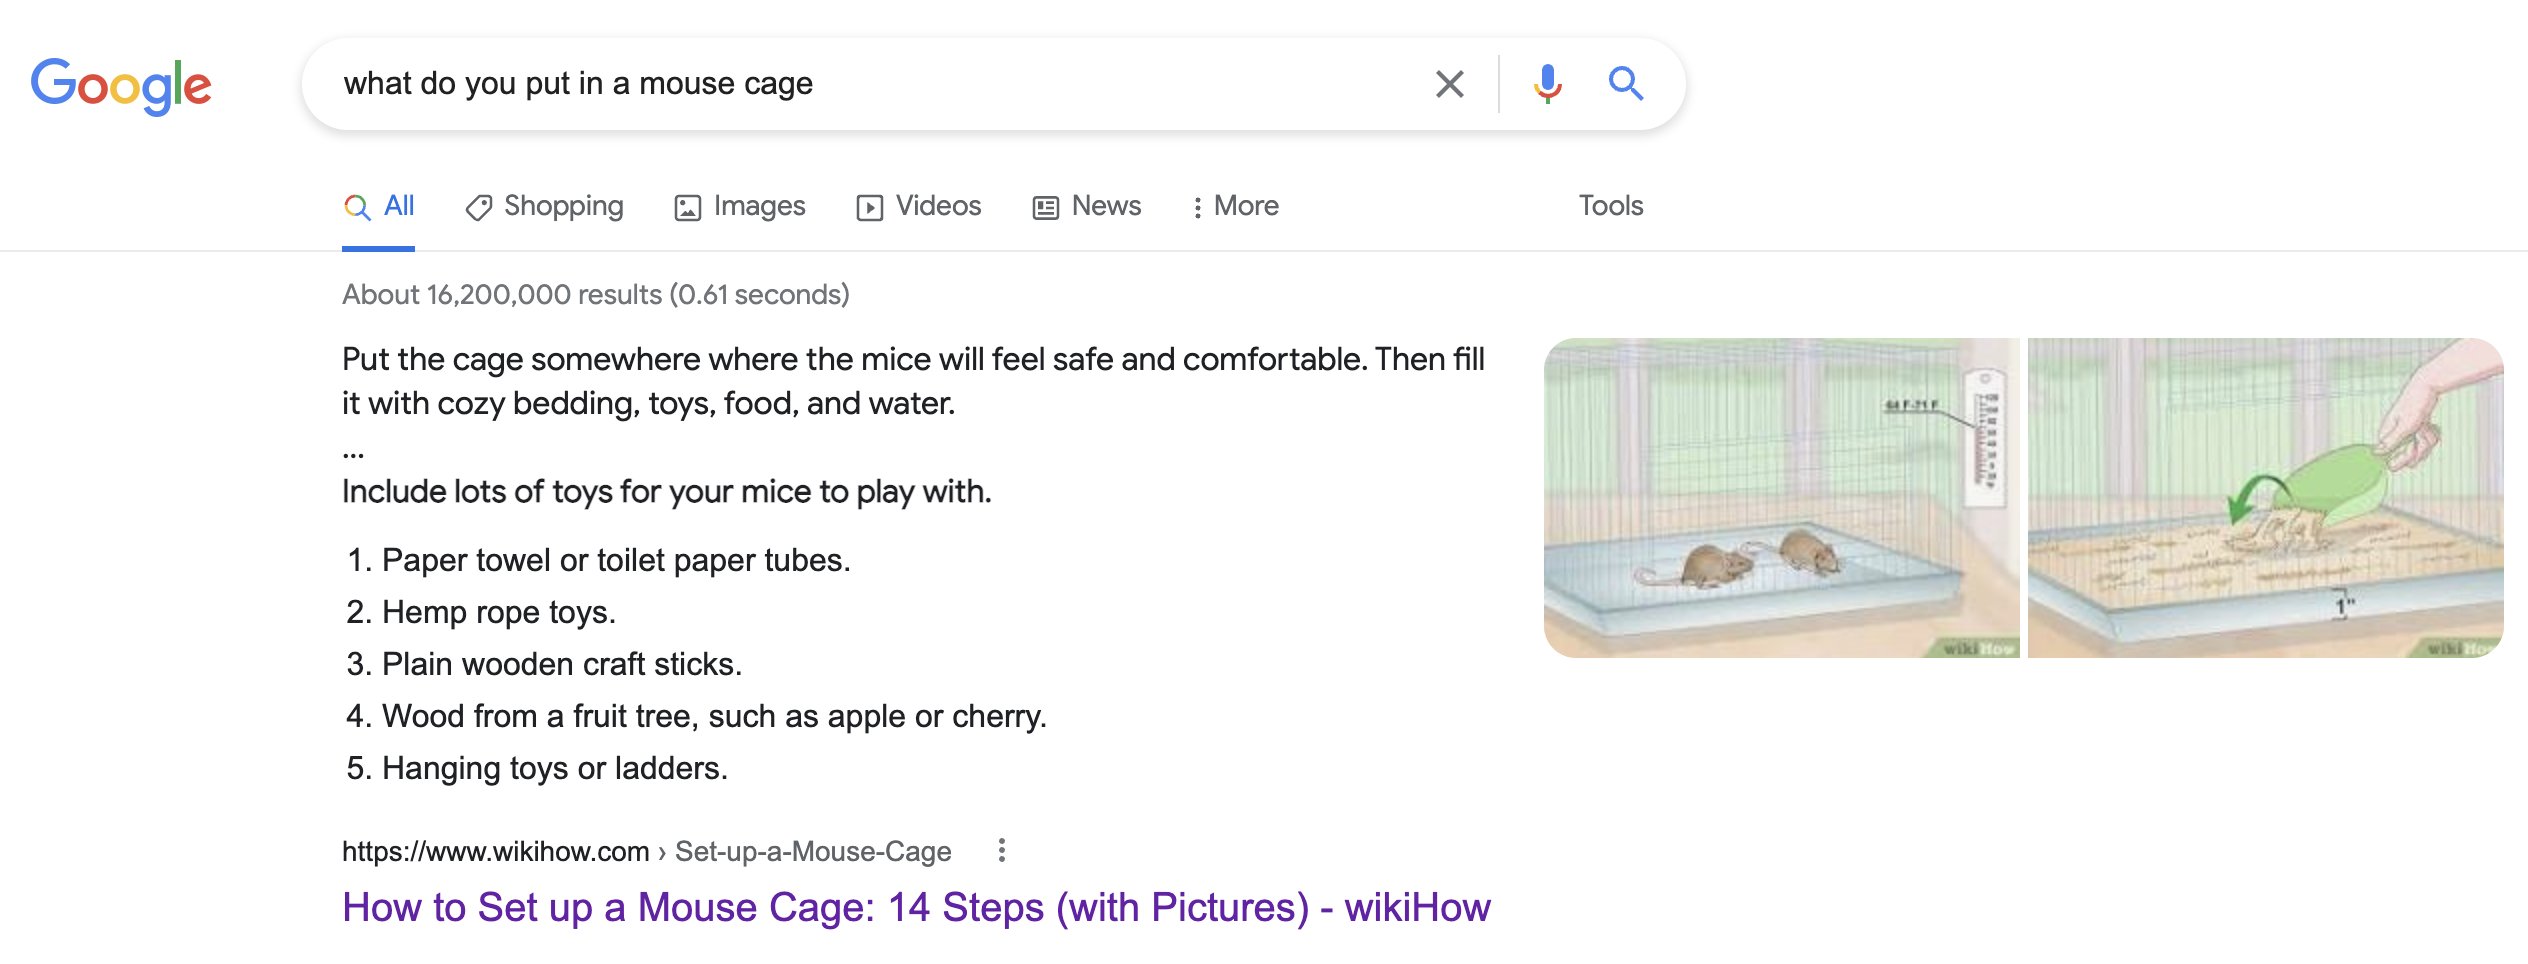 How to Set up a Mouse Cage: 14 Steps (with Pictures) - wikiHow